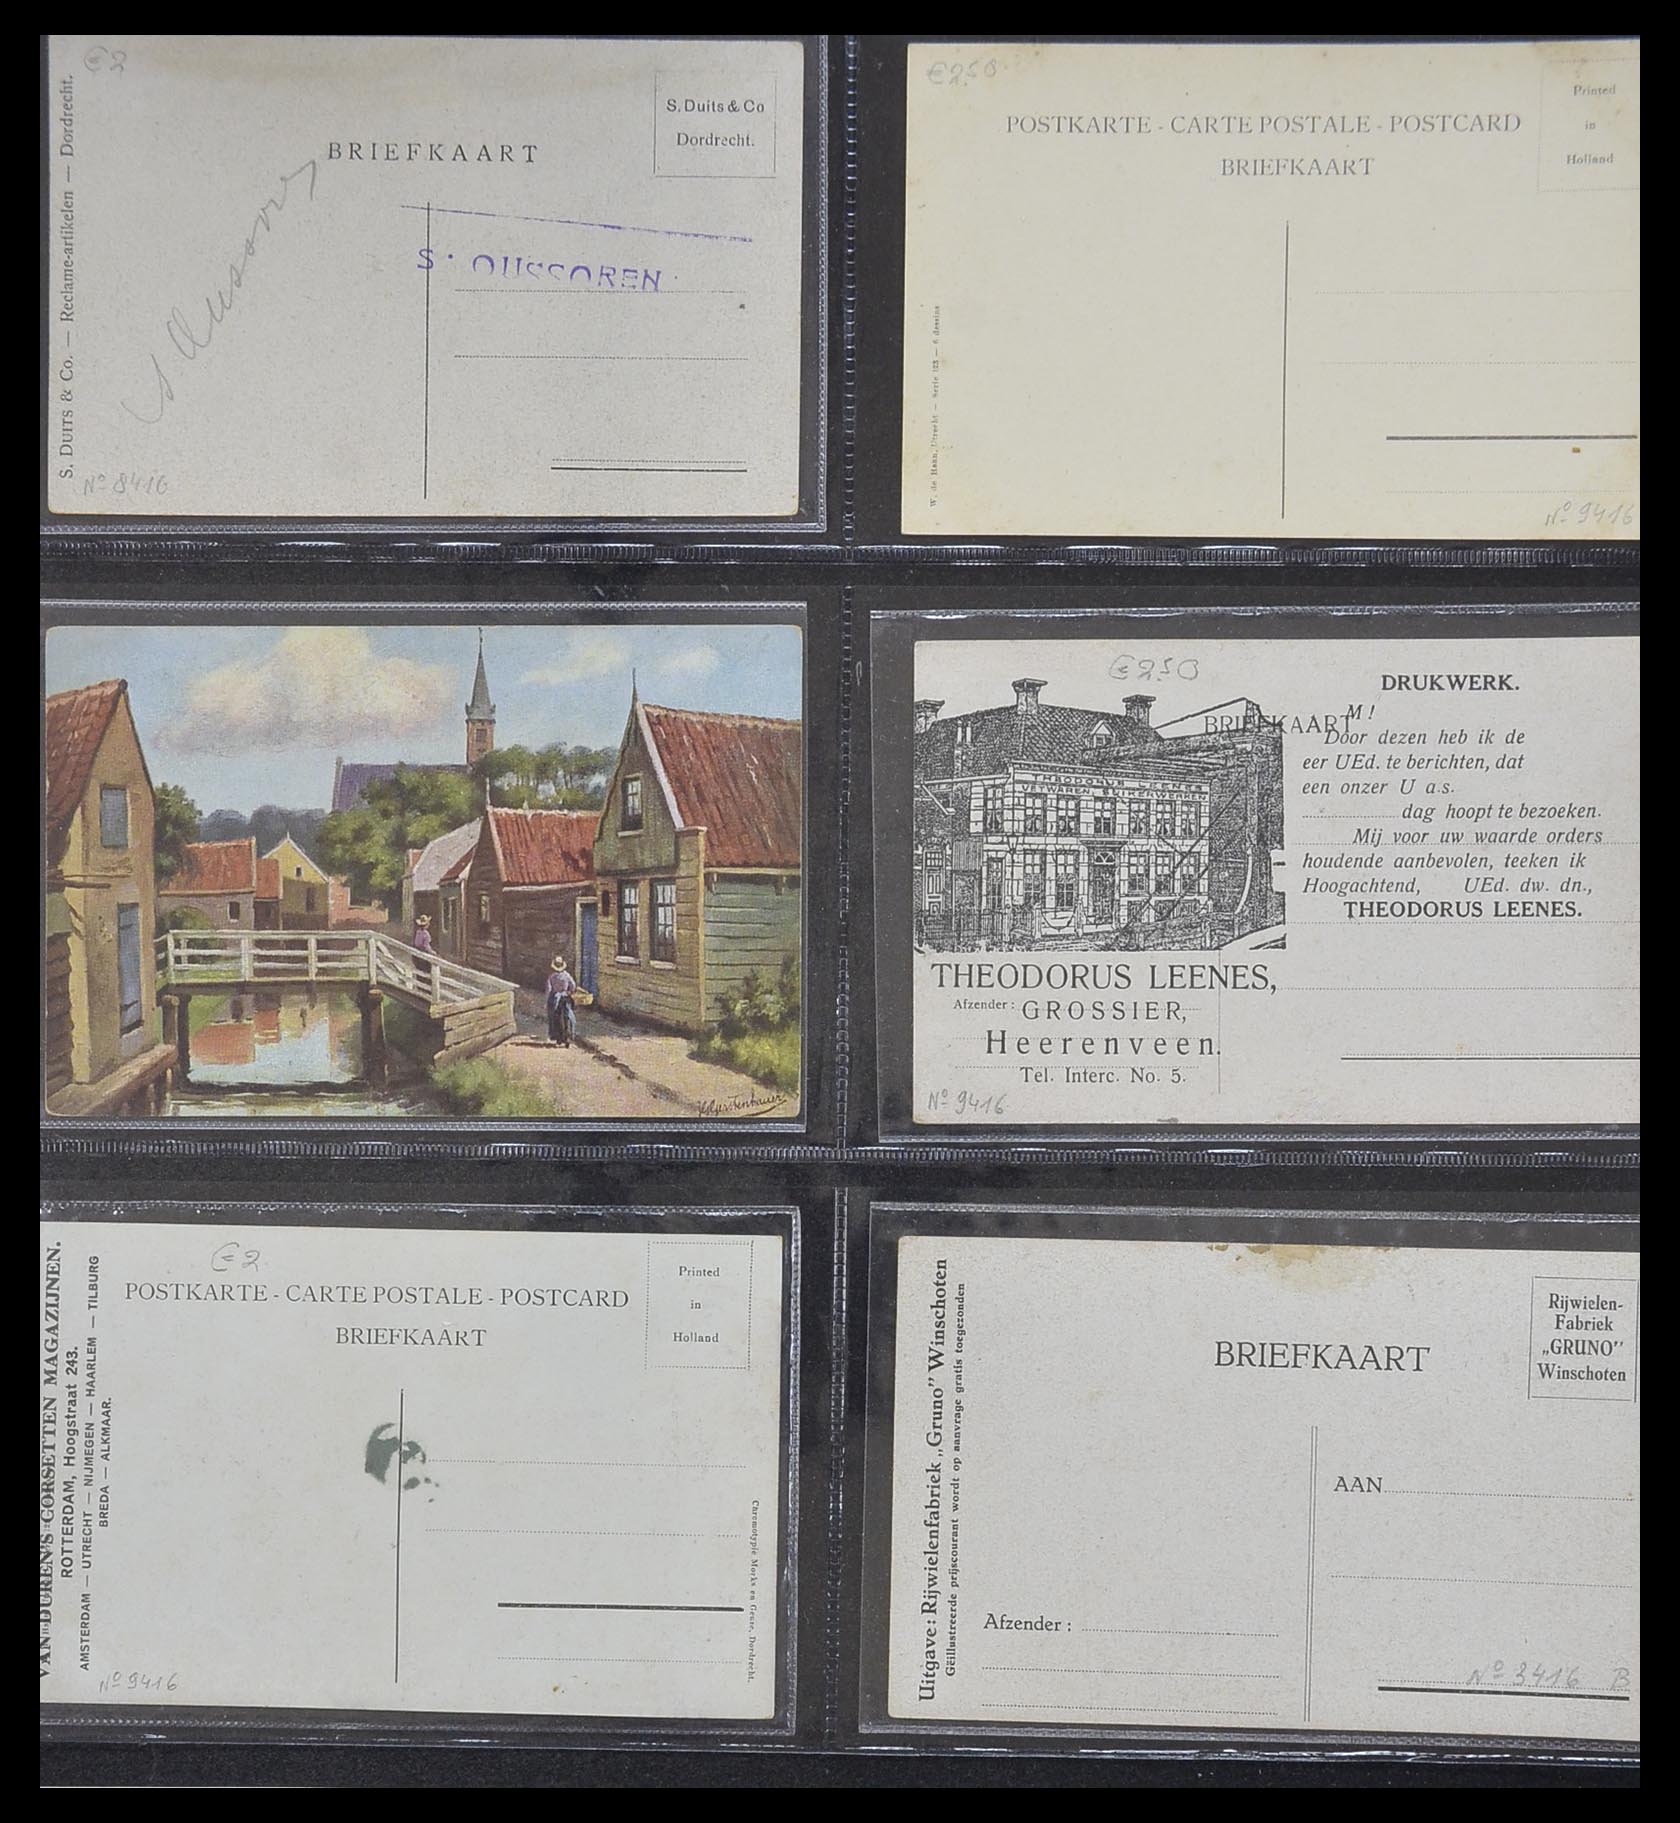 33928 064 - Stamp collection 33928 Netherlands picture postcards 1910-1930.